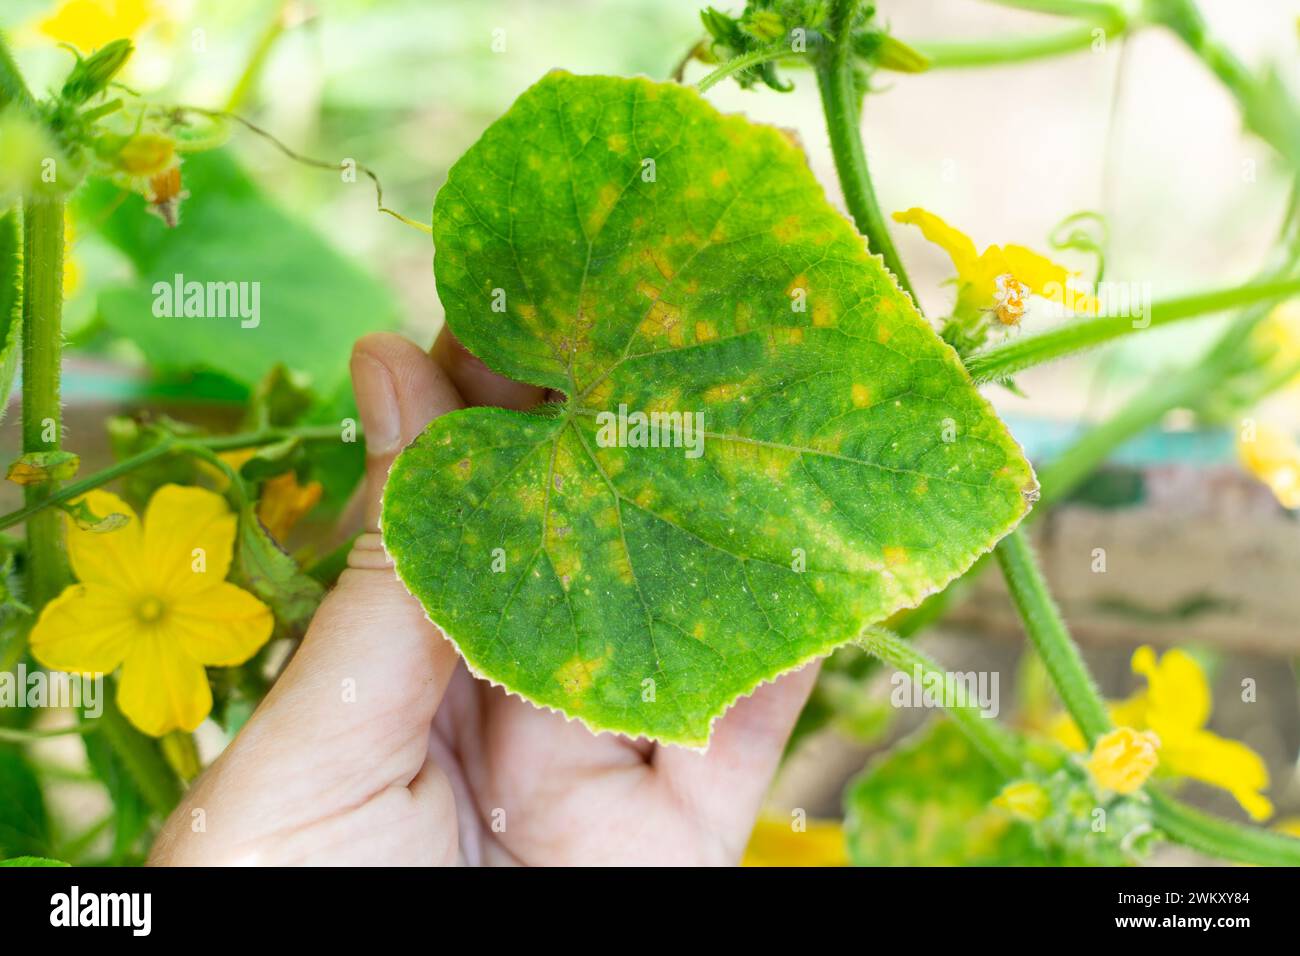 cucumber plant with yellow flowers and leaves affected by cucumber mosaic disease. Inspection of the plant. Stock Photo